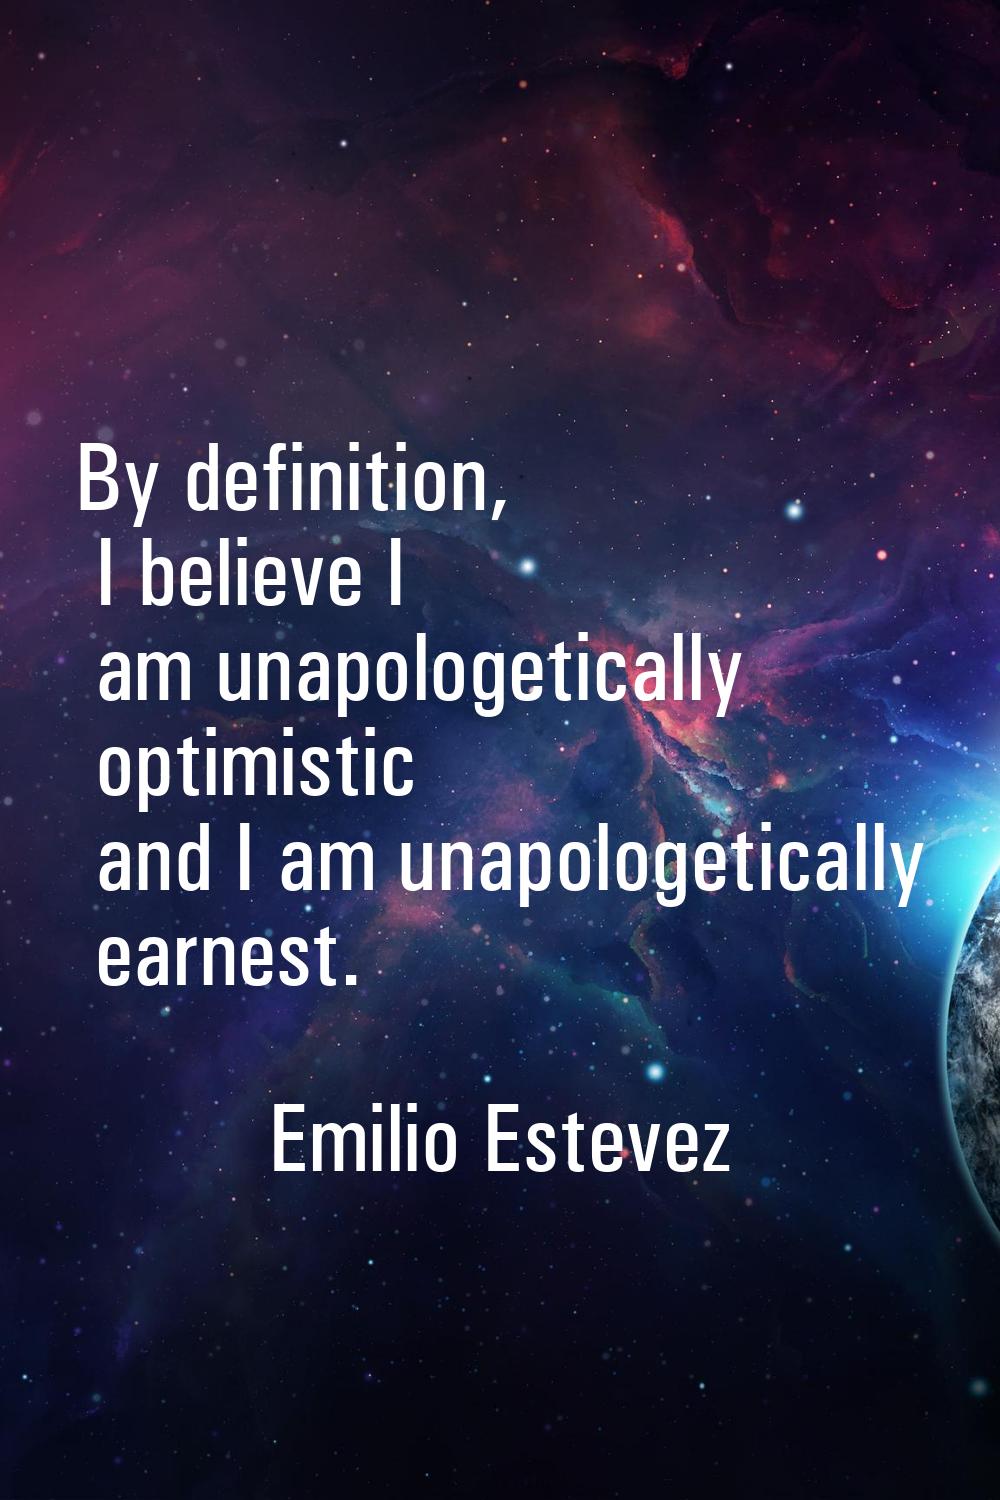 By definition, I believe I am unapologetically optimistic and I am unapologetically earnest.